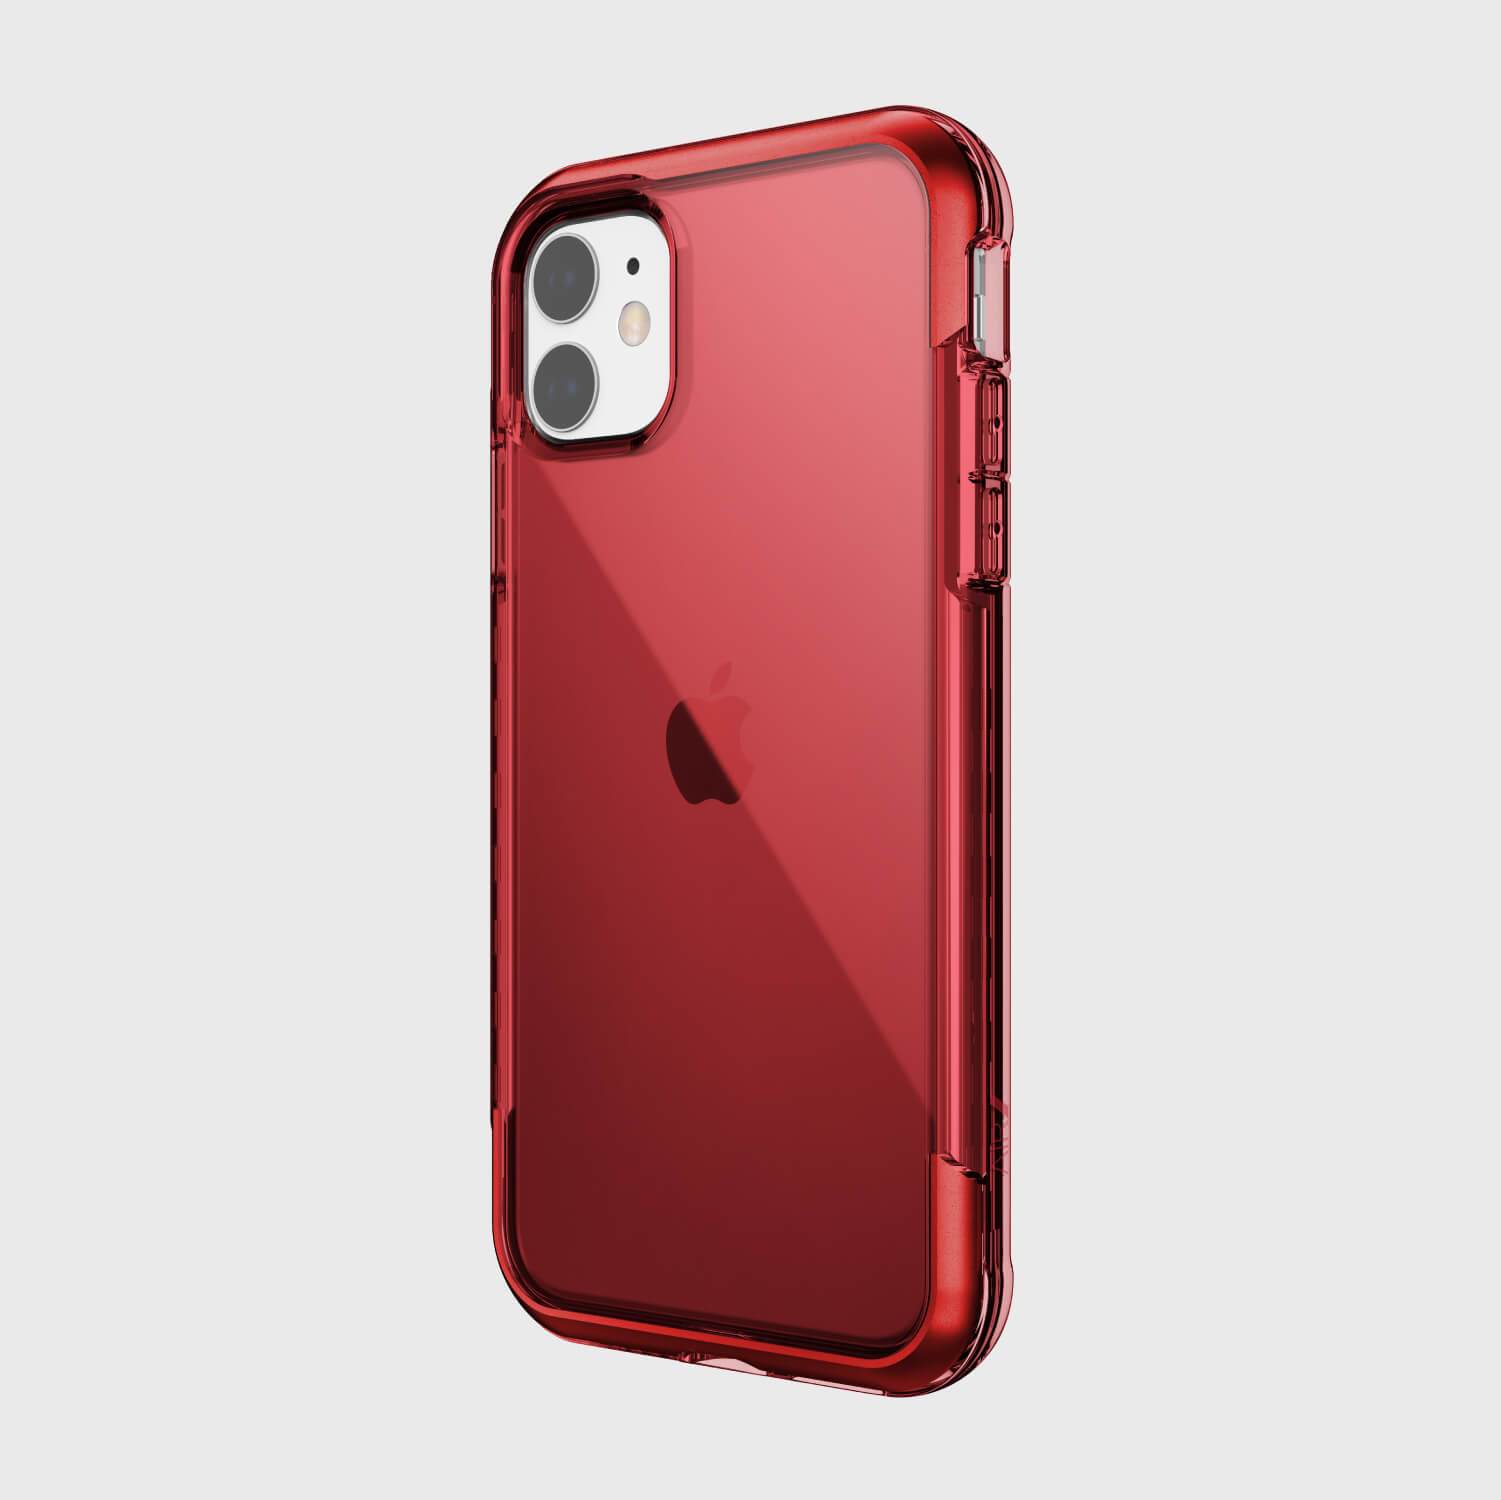 A red iPhone 11 case - AIR with wireless charging on a white background.